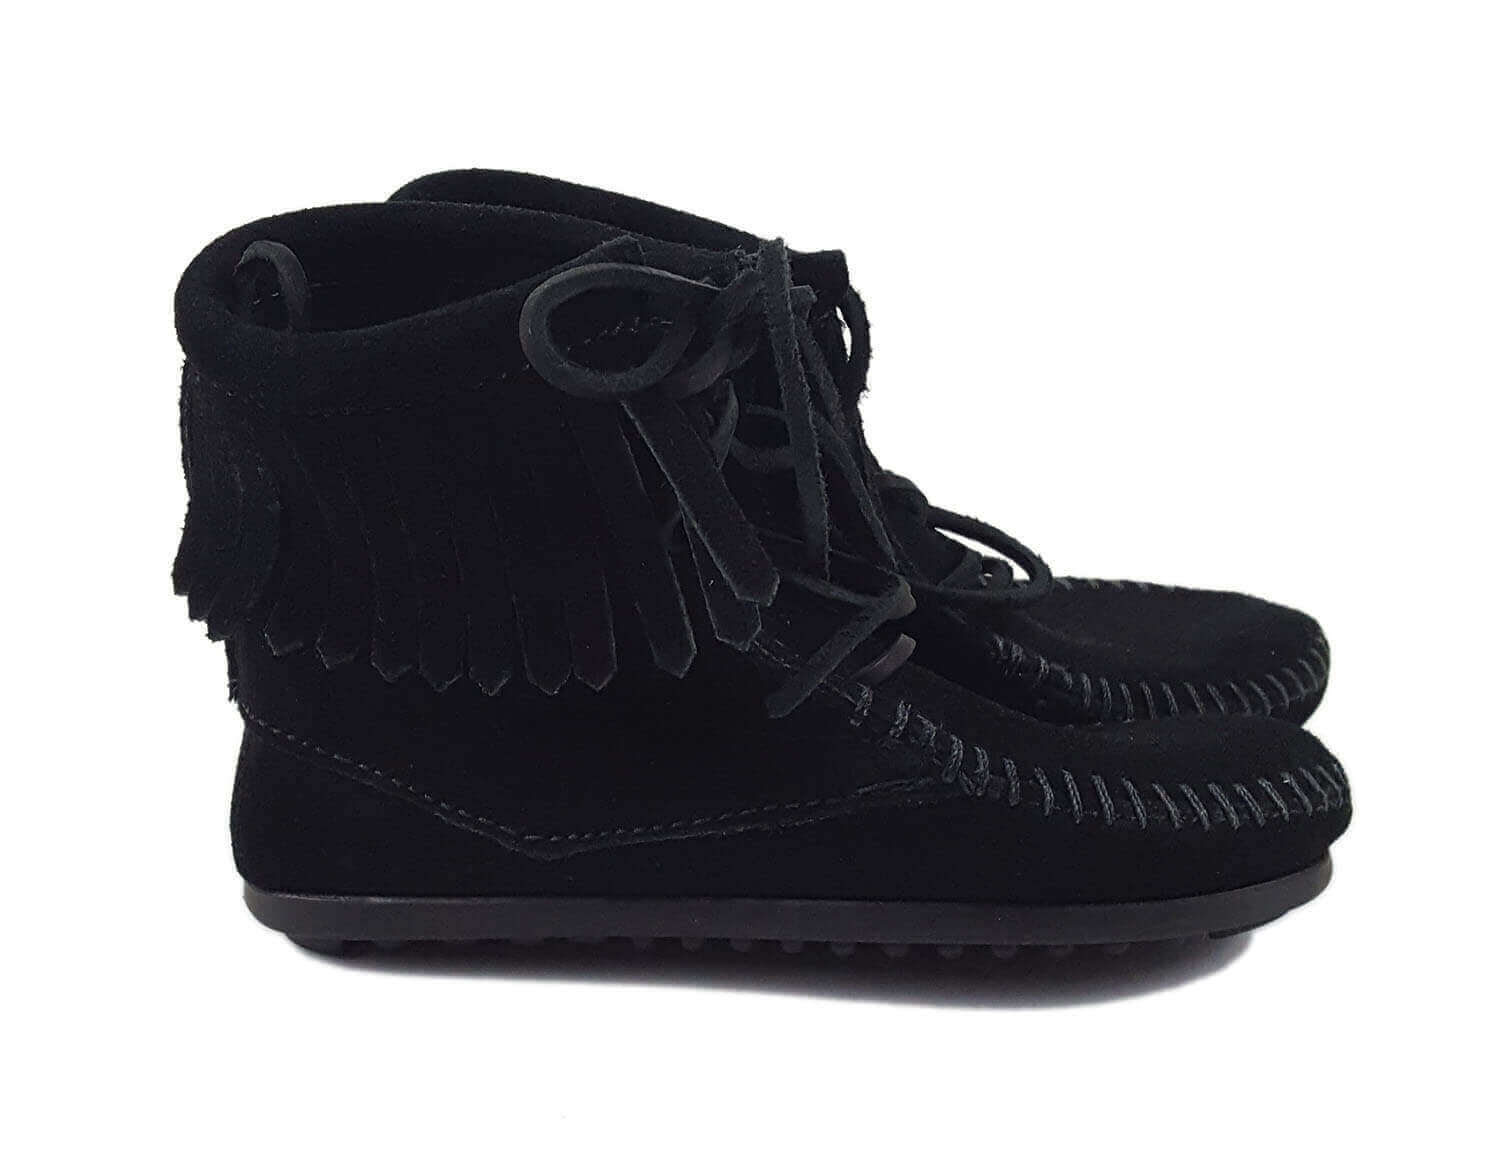 Black Suede Kids' Ankle Boots